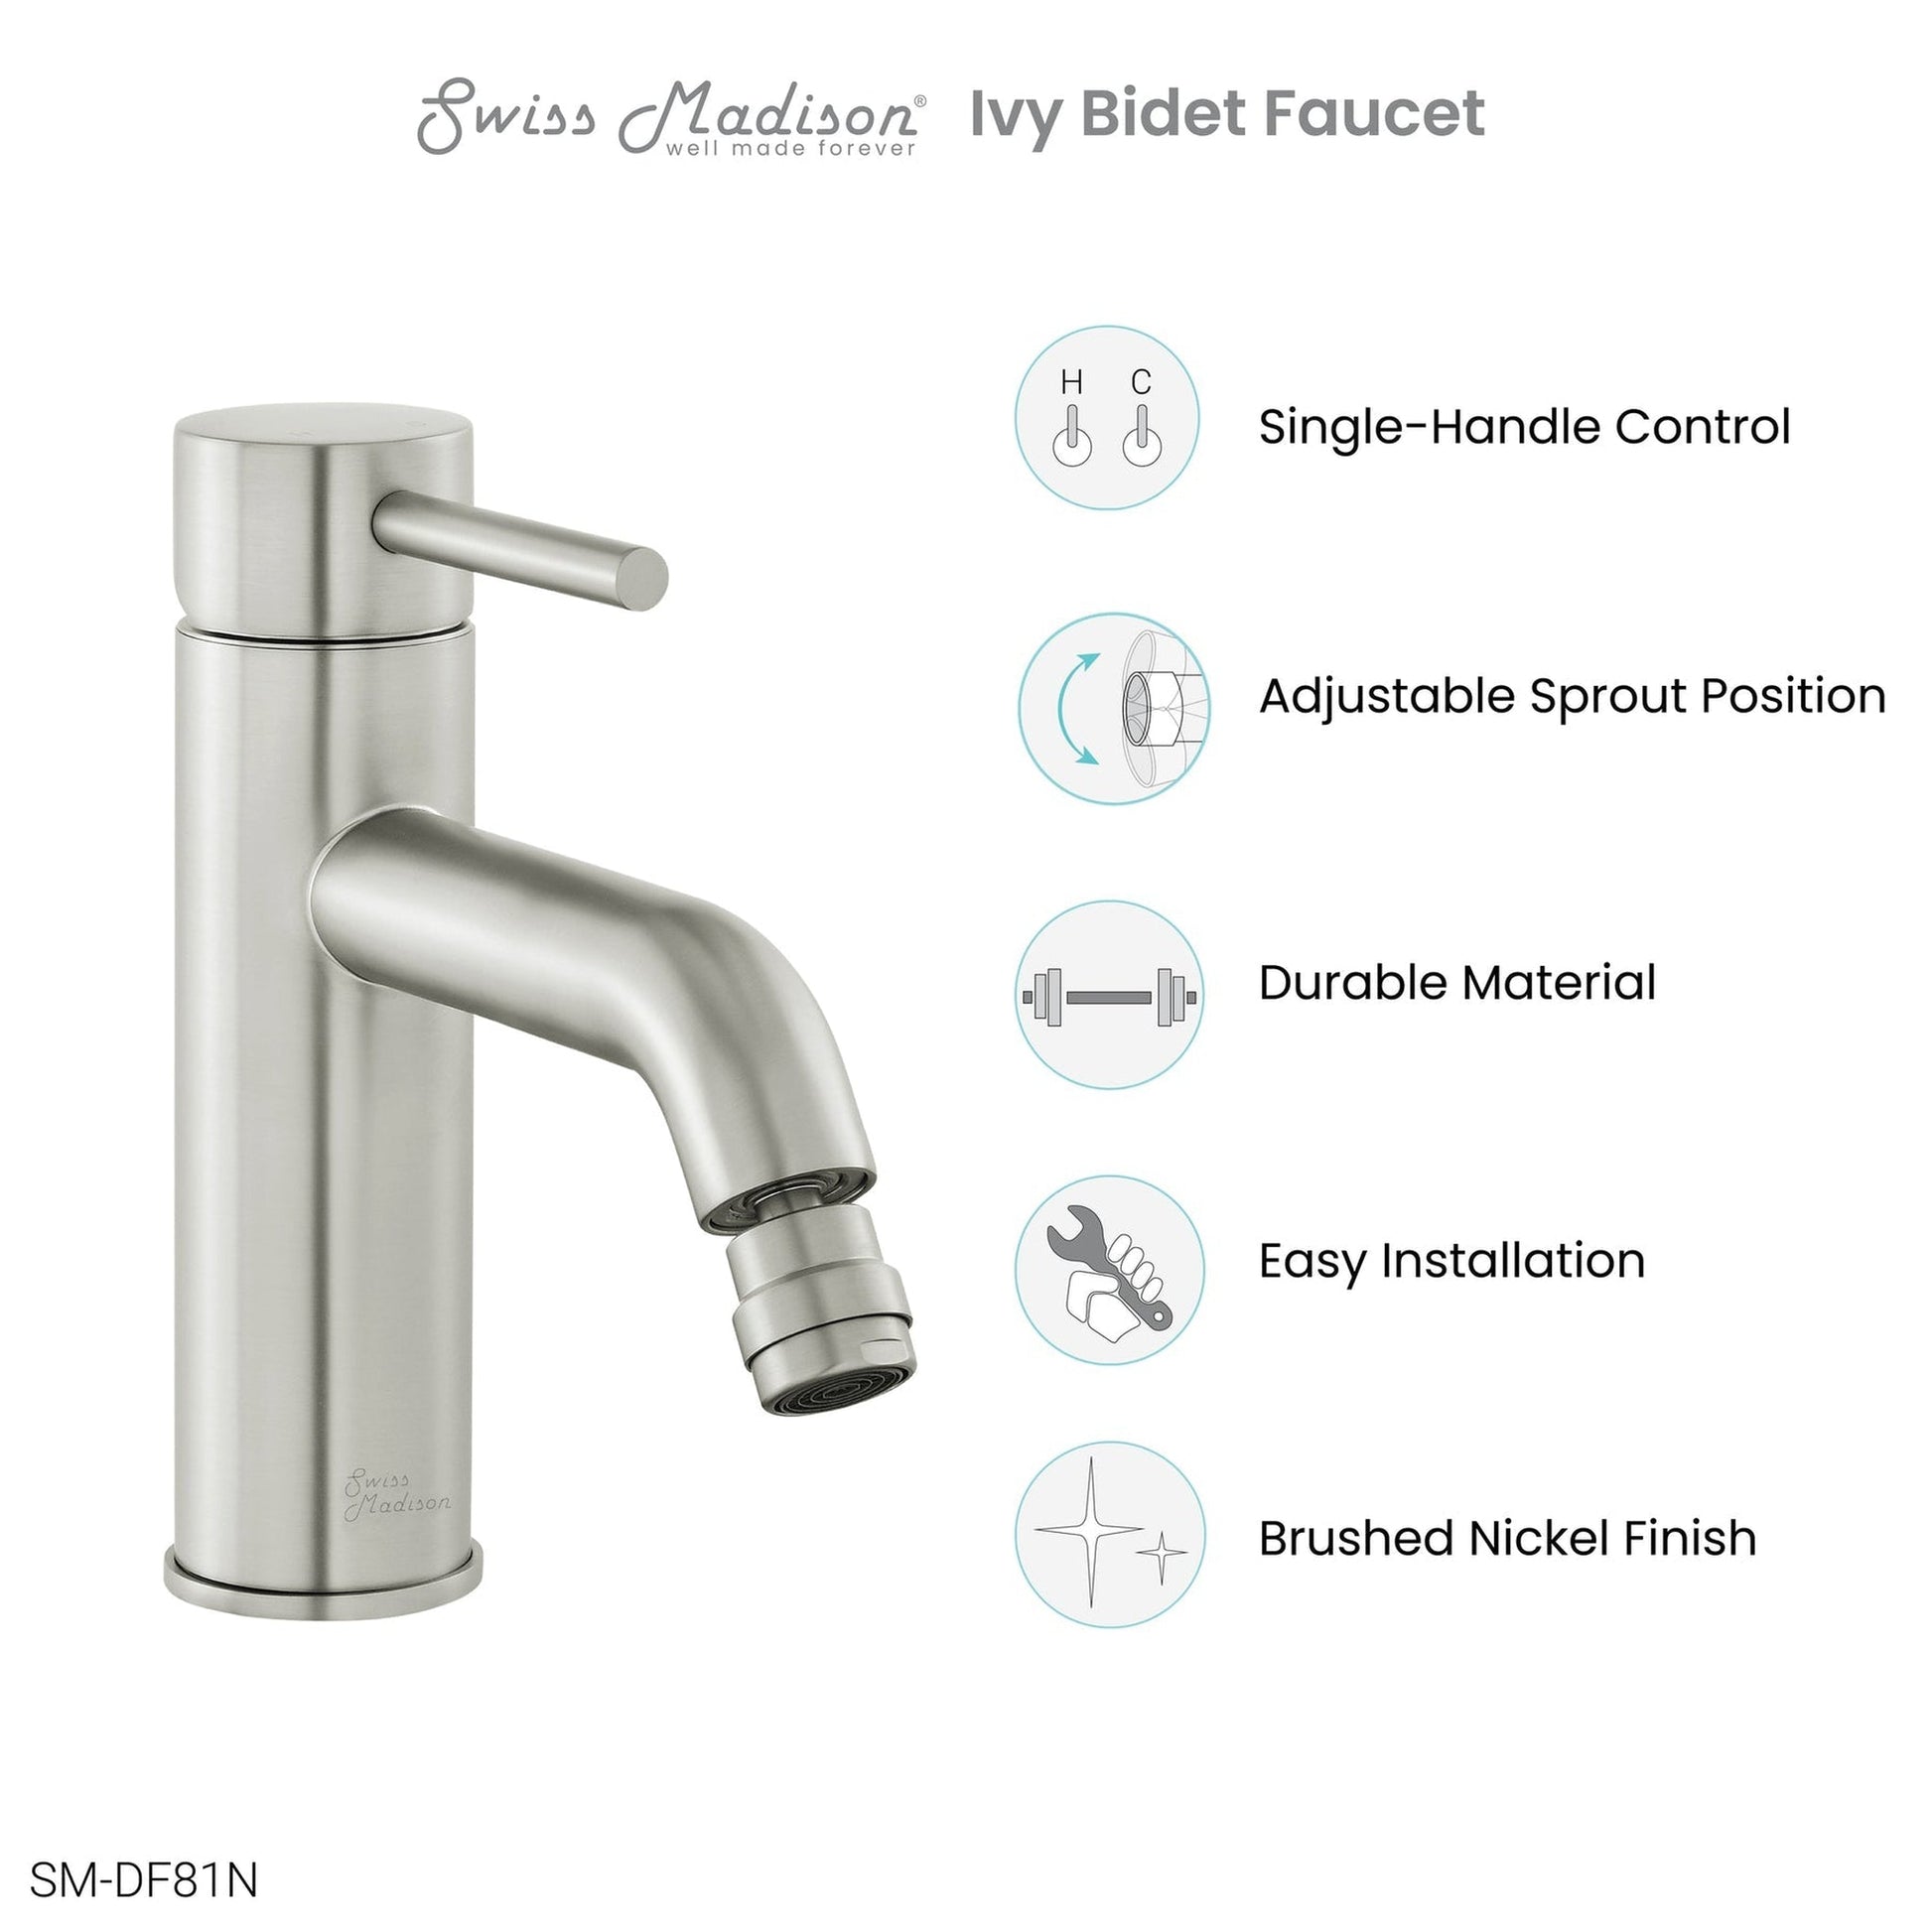 Swiss Madison Ivy 7" Nickel Single Hole Fixture Mounted Bidet Faucet With Flow Rate of 1.28 GPM